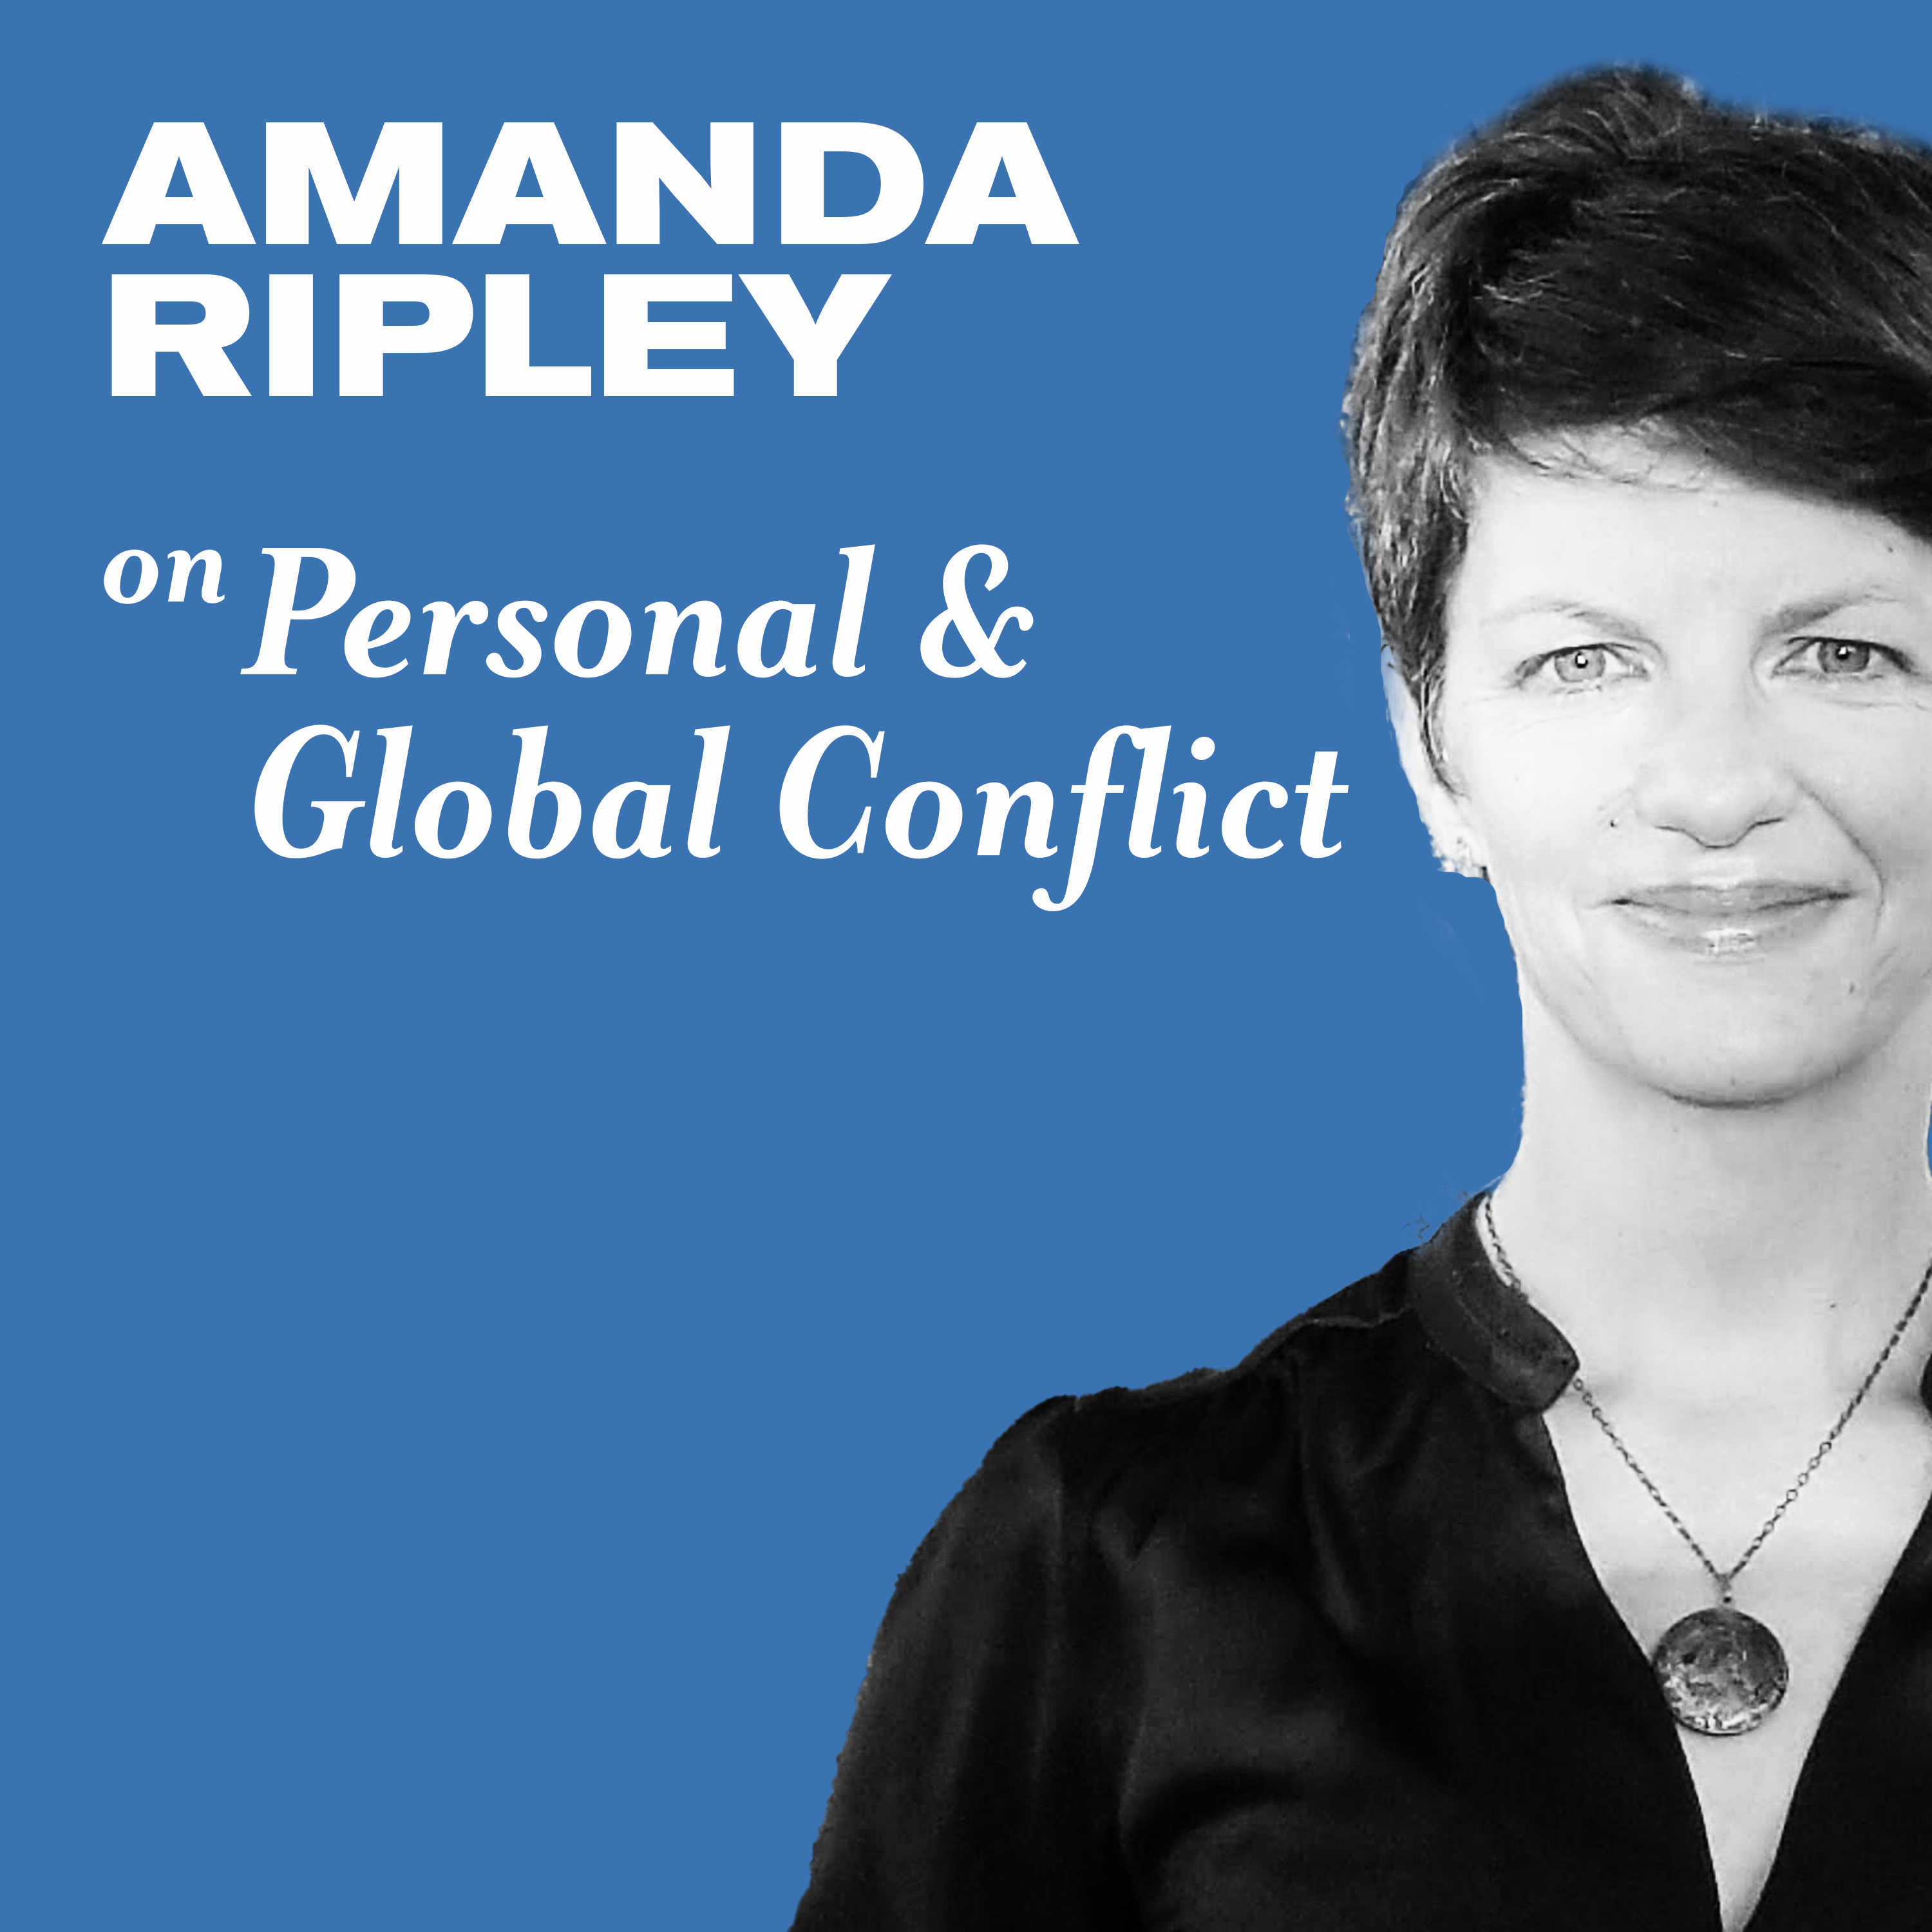 Amanda Ripley on Personal and Global Conflict